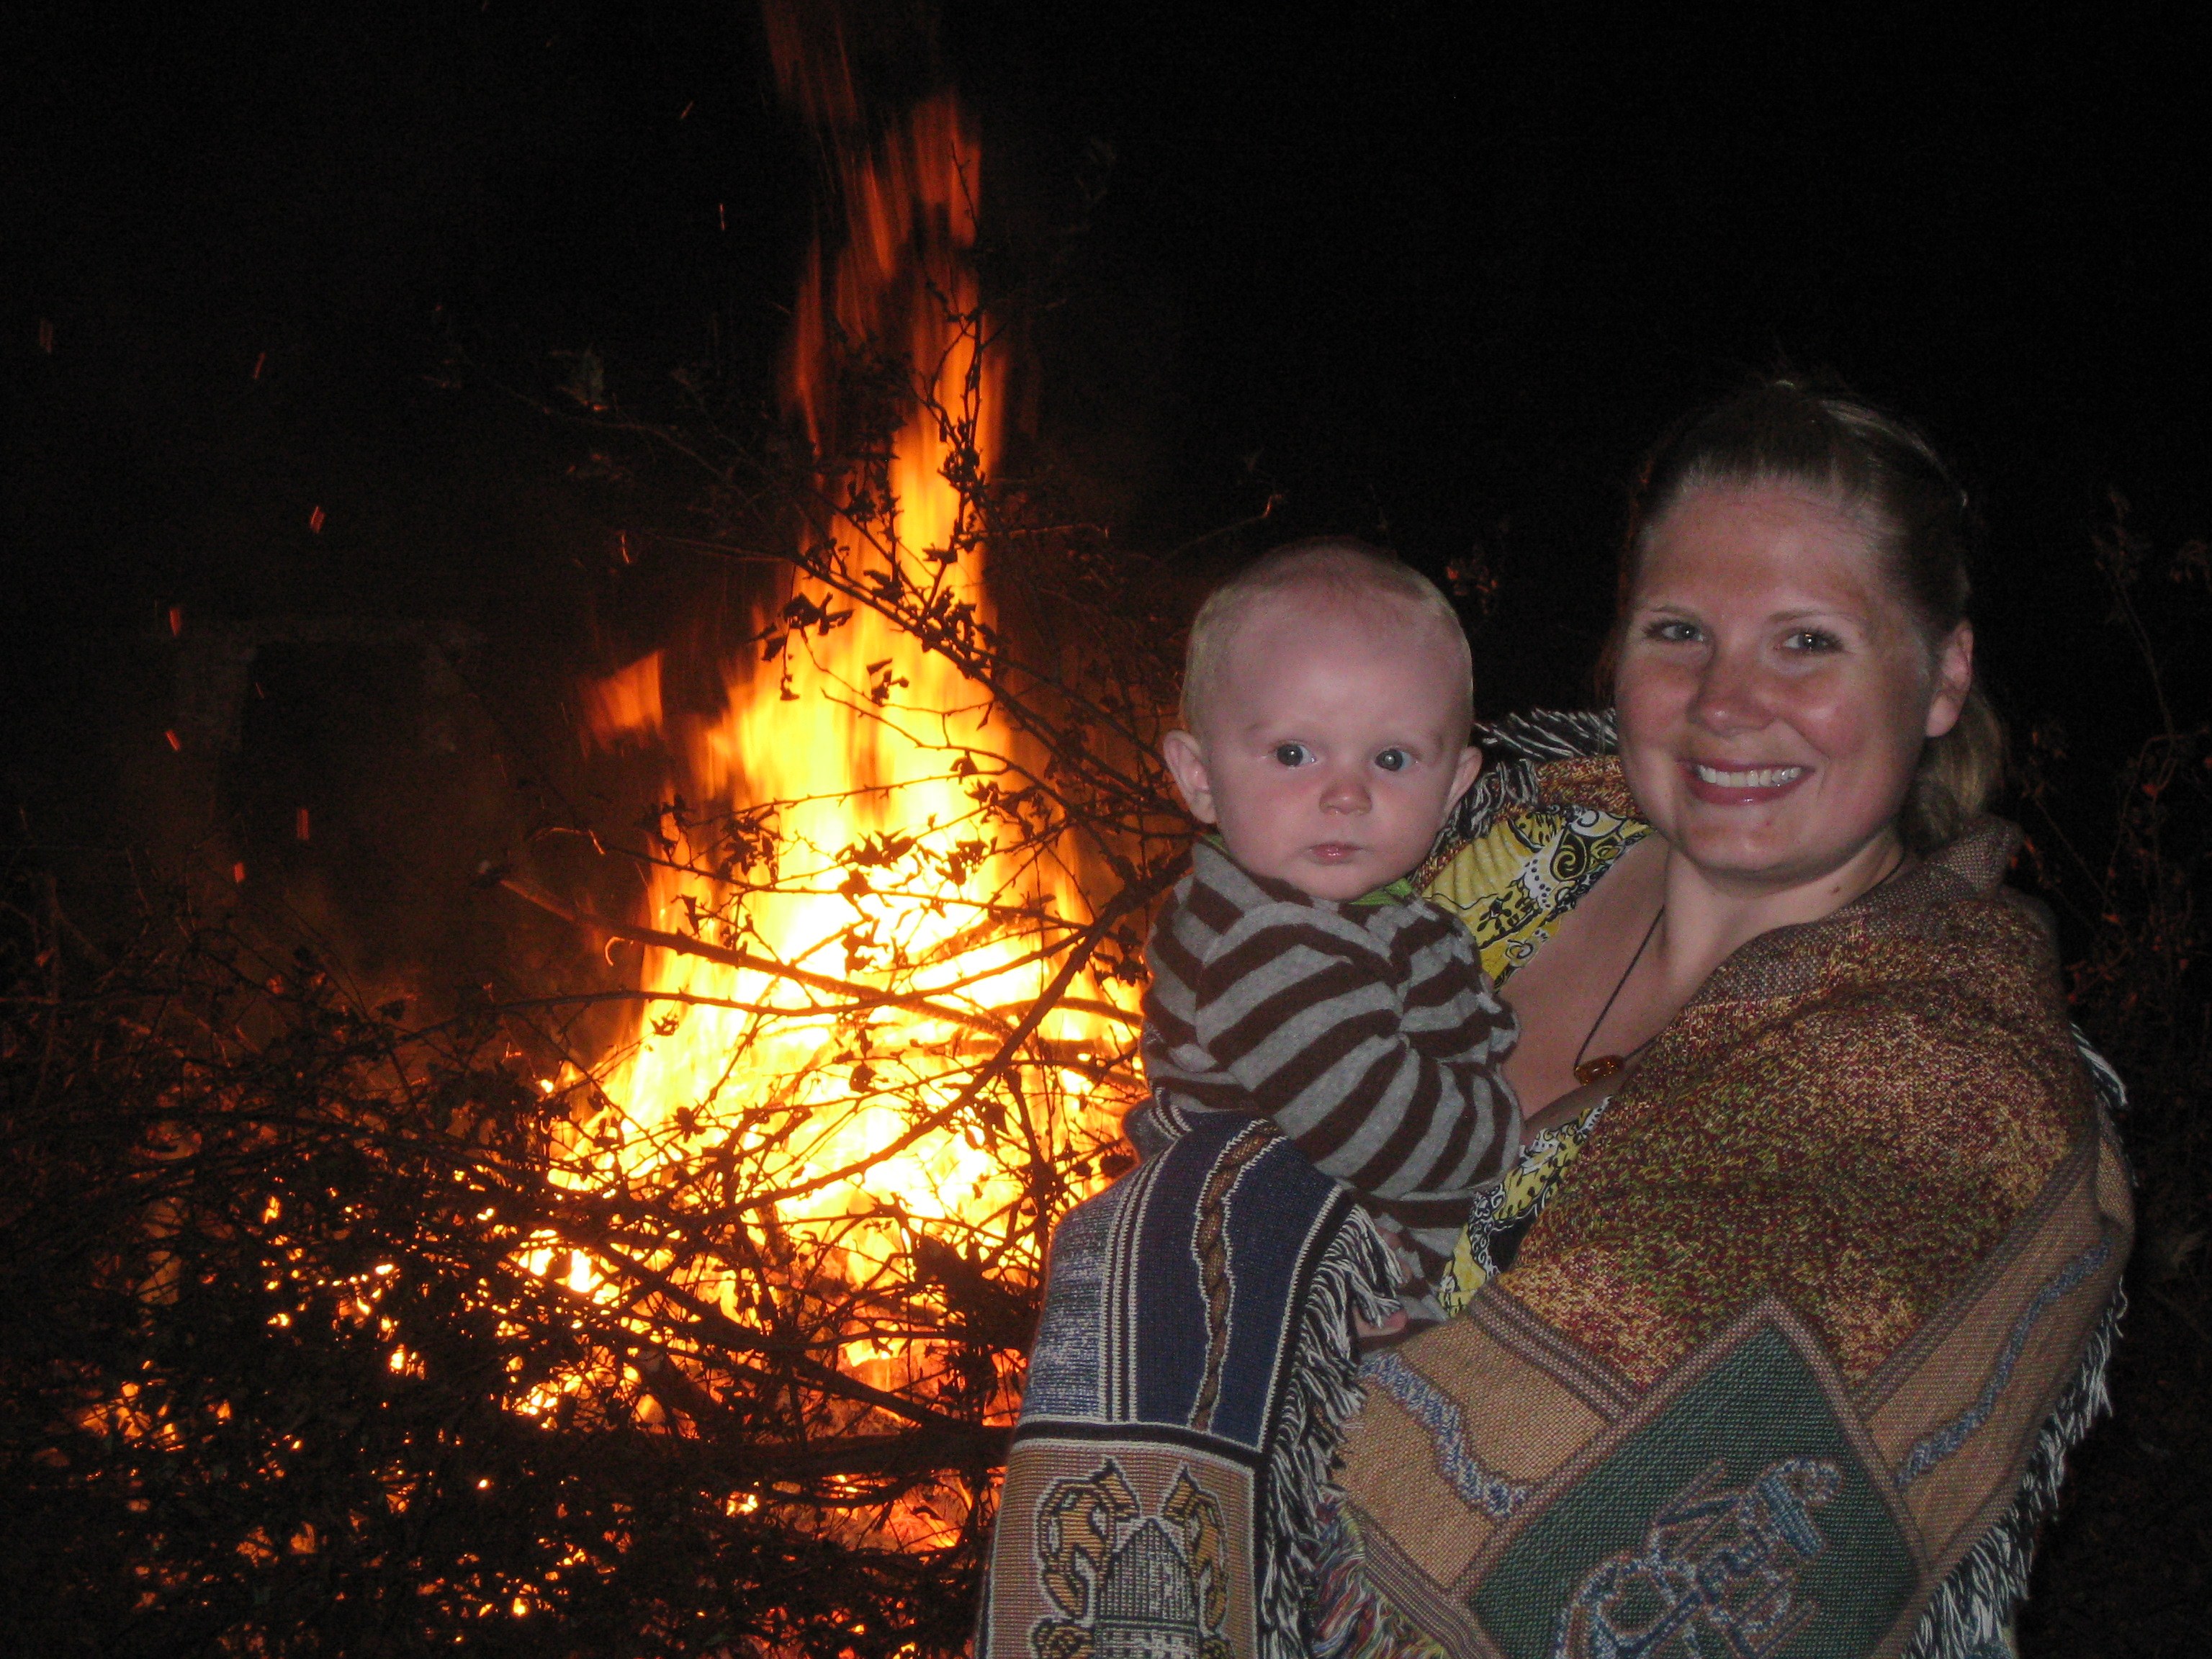 For example, holding him near a bonfire.